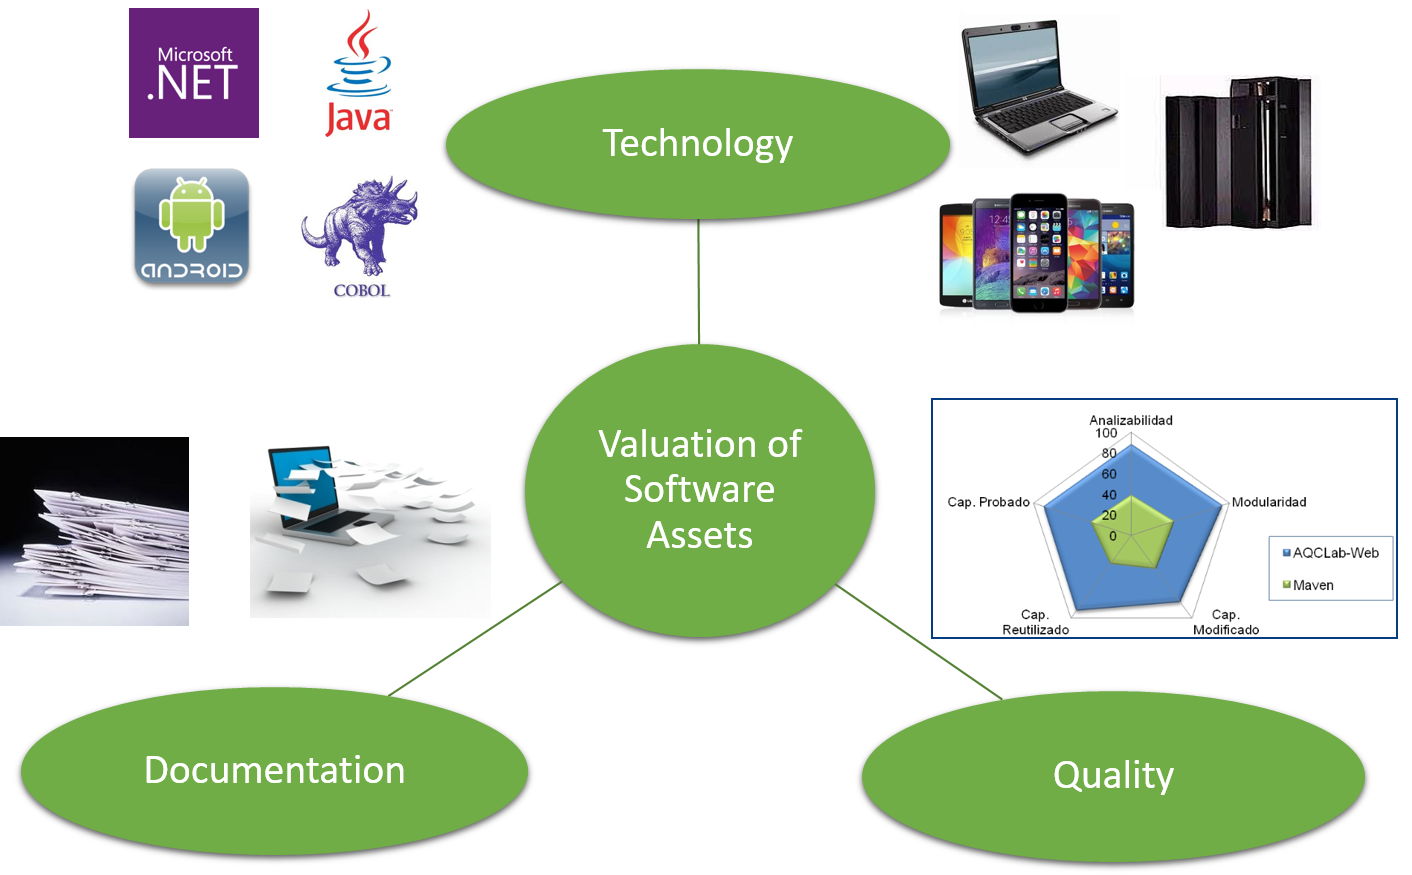 Valuation of Software Assets